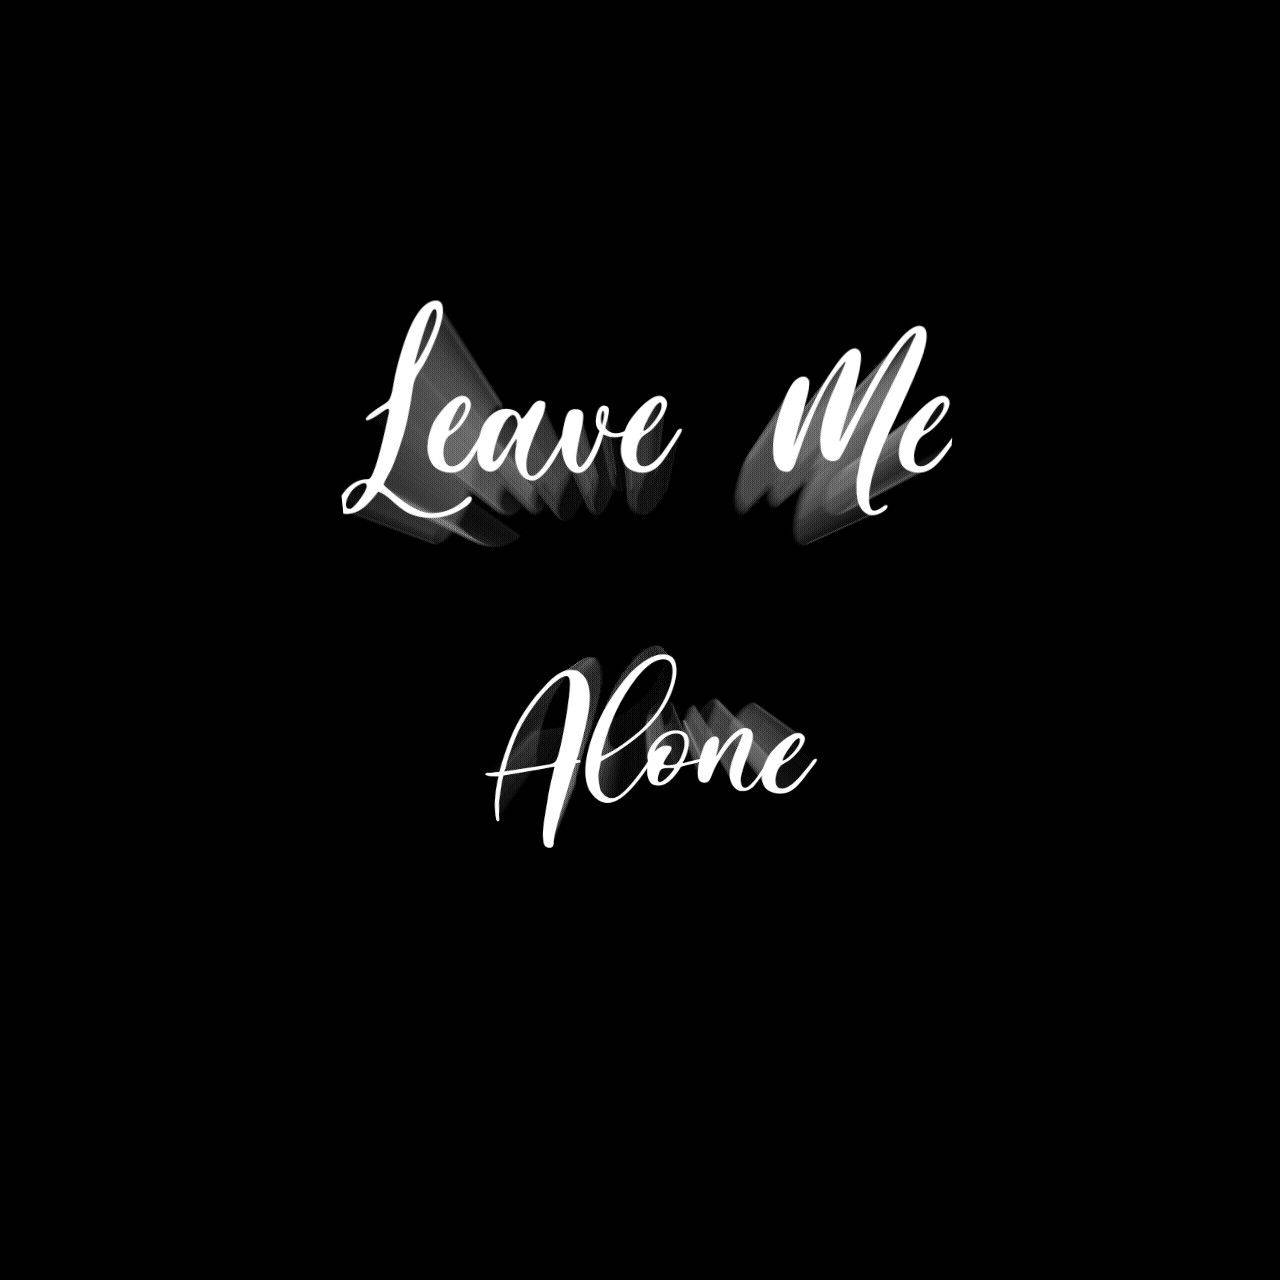 Download Black And White Leave Me Alone Wallpaper 